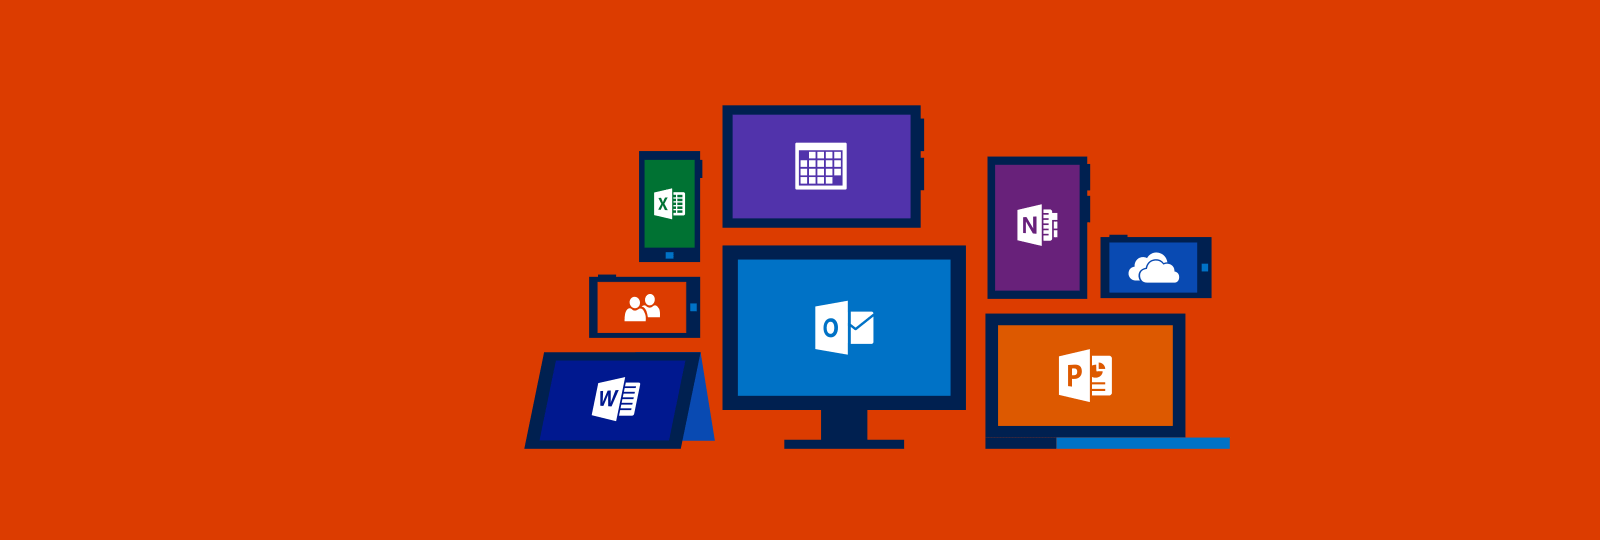 Office 365 Wallpaper Free Office 365 Background